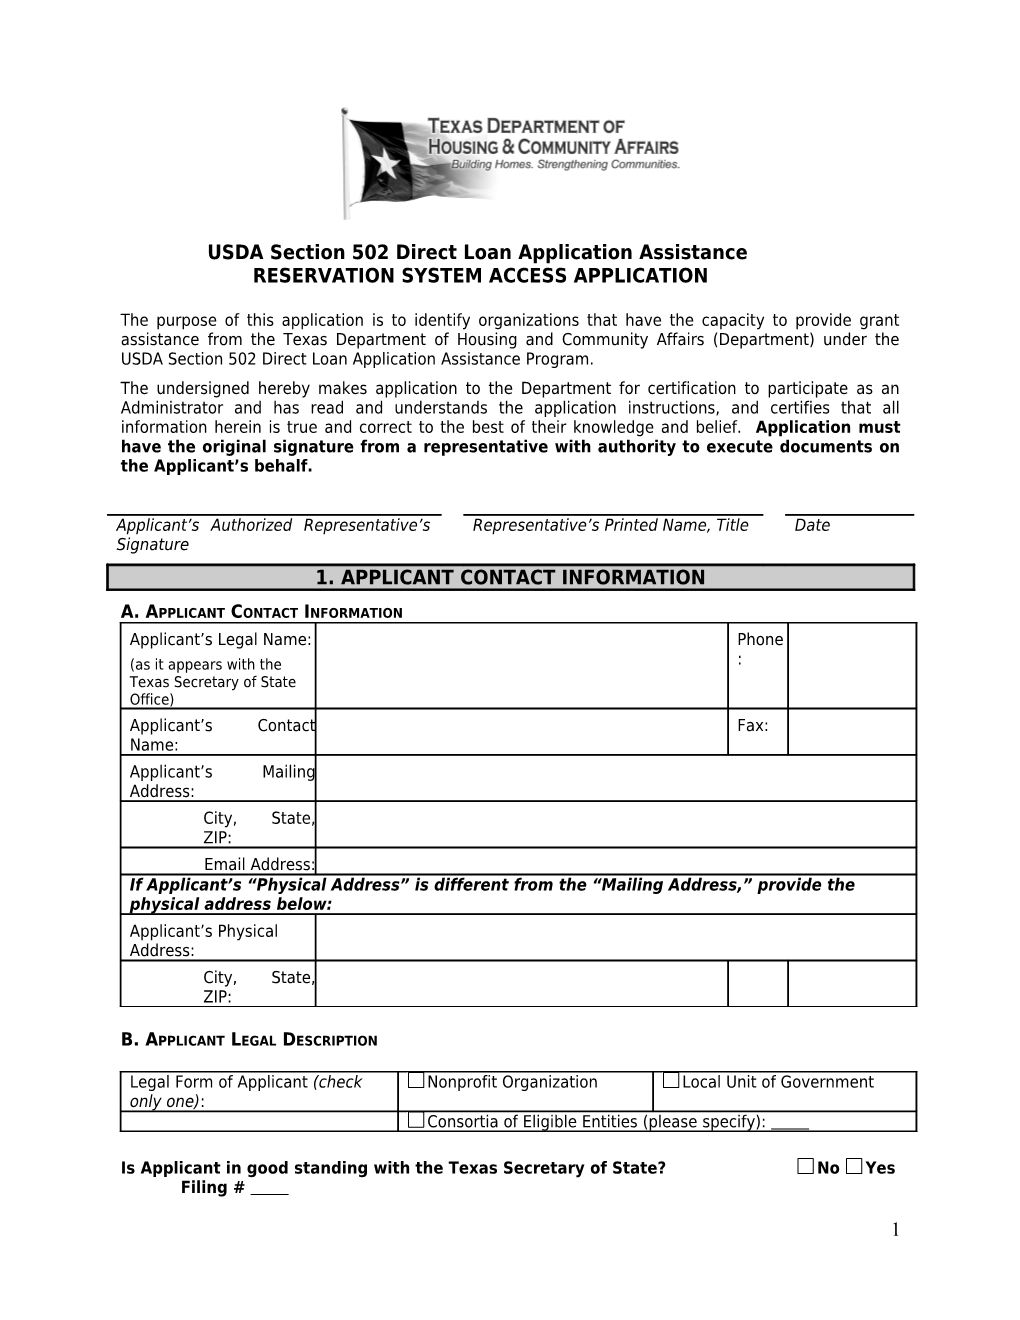 NOHP Certification Application